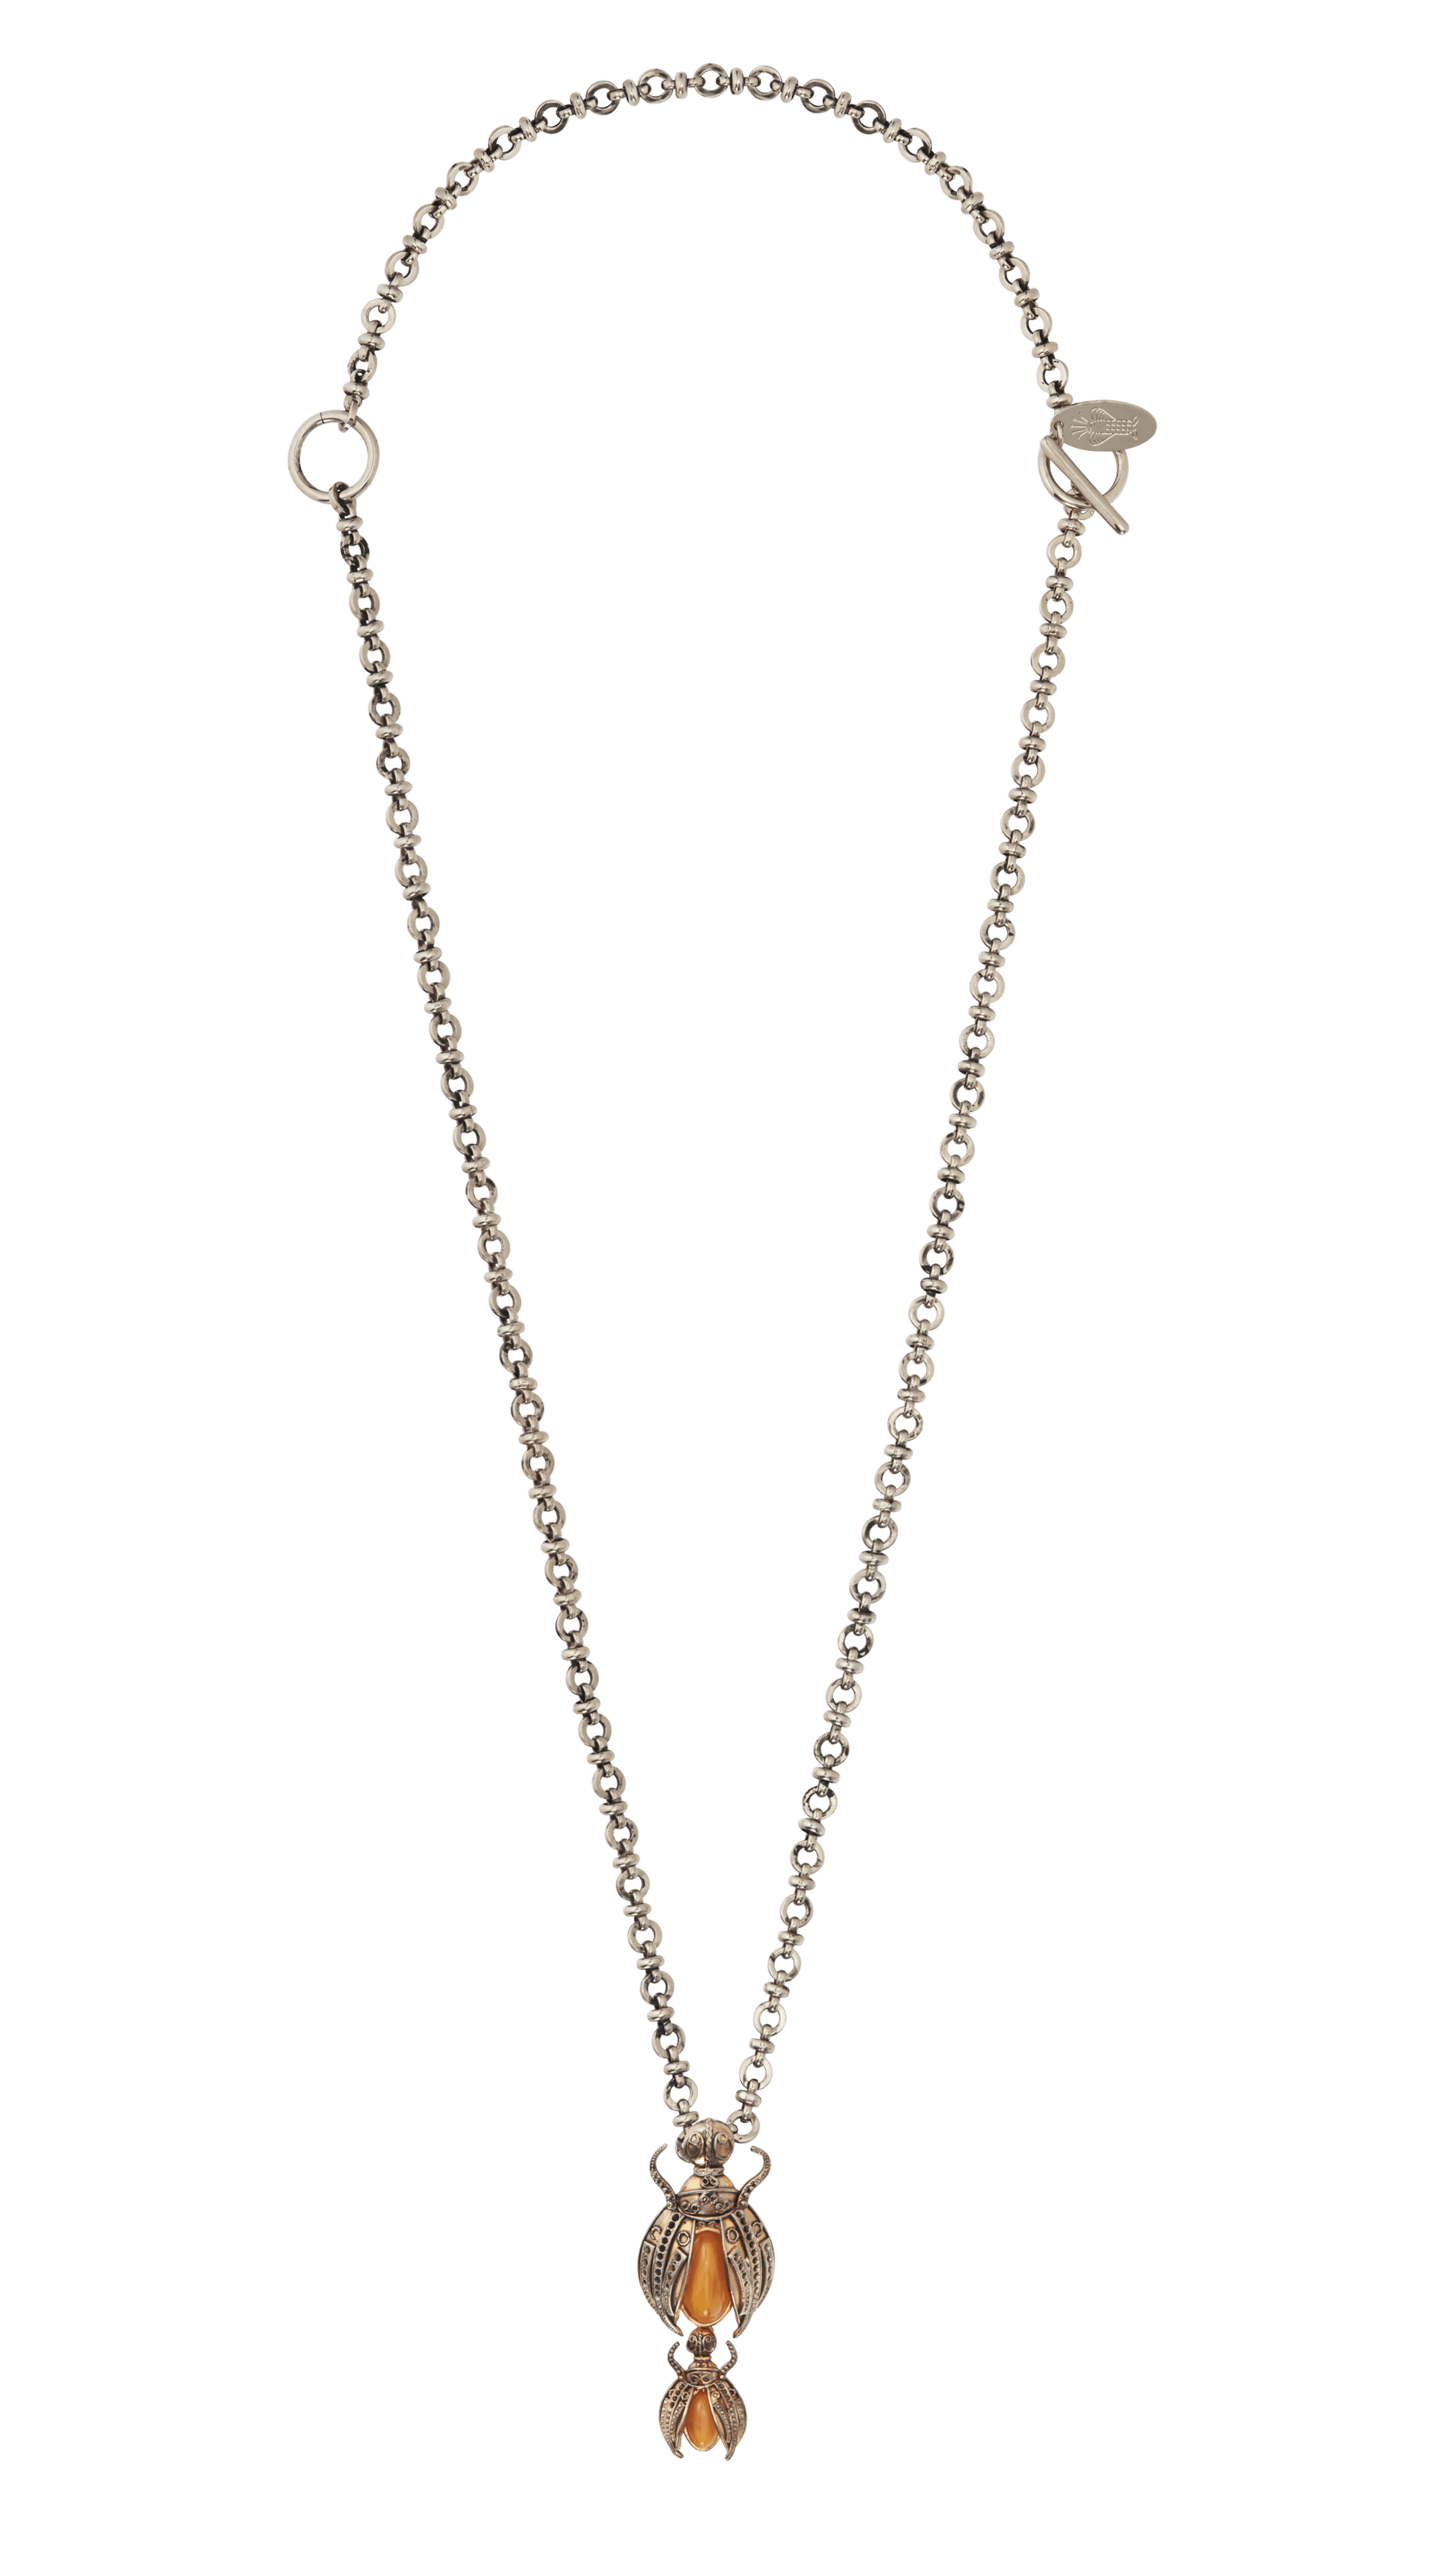 Silver Scarab Luxury Necklace Sonia Petroff Silver Scarab Luxury Chain and Pendant gb 